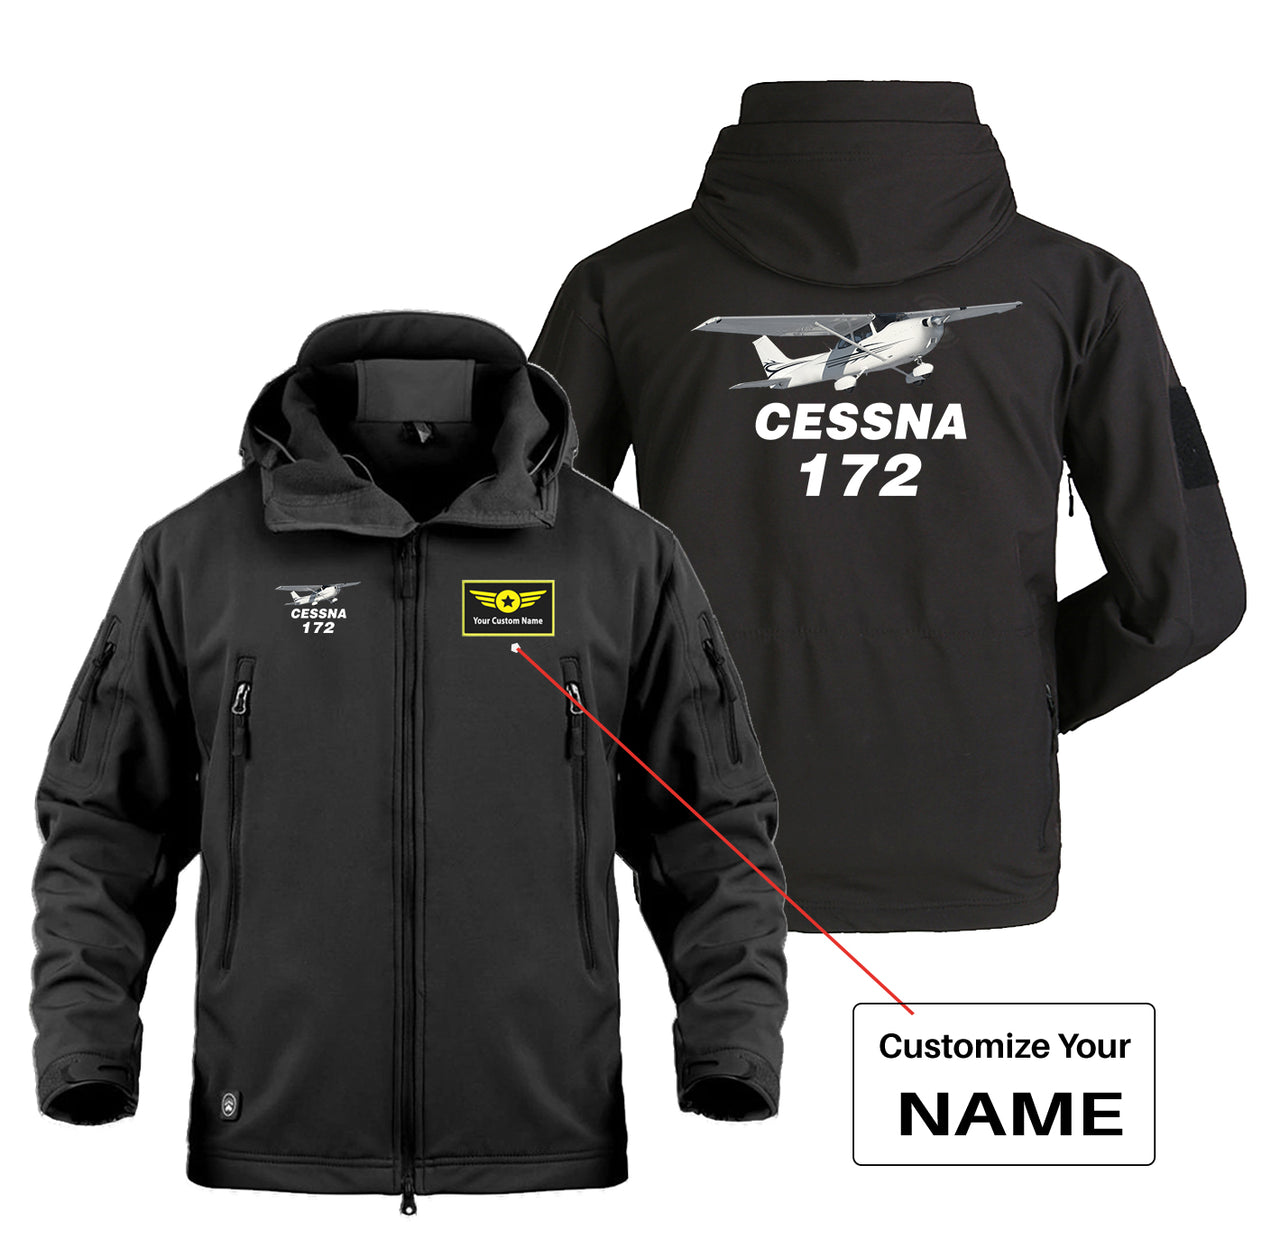 The Cessna 172 Designed Military Jackets (Customizable)